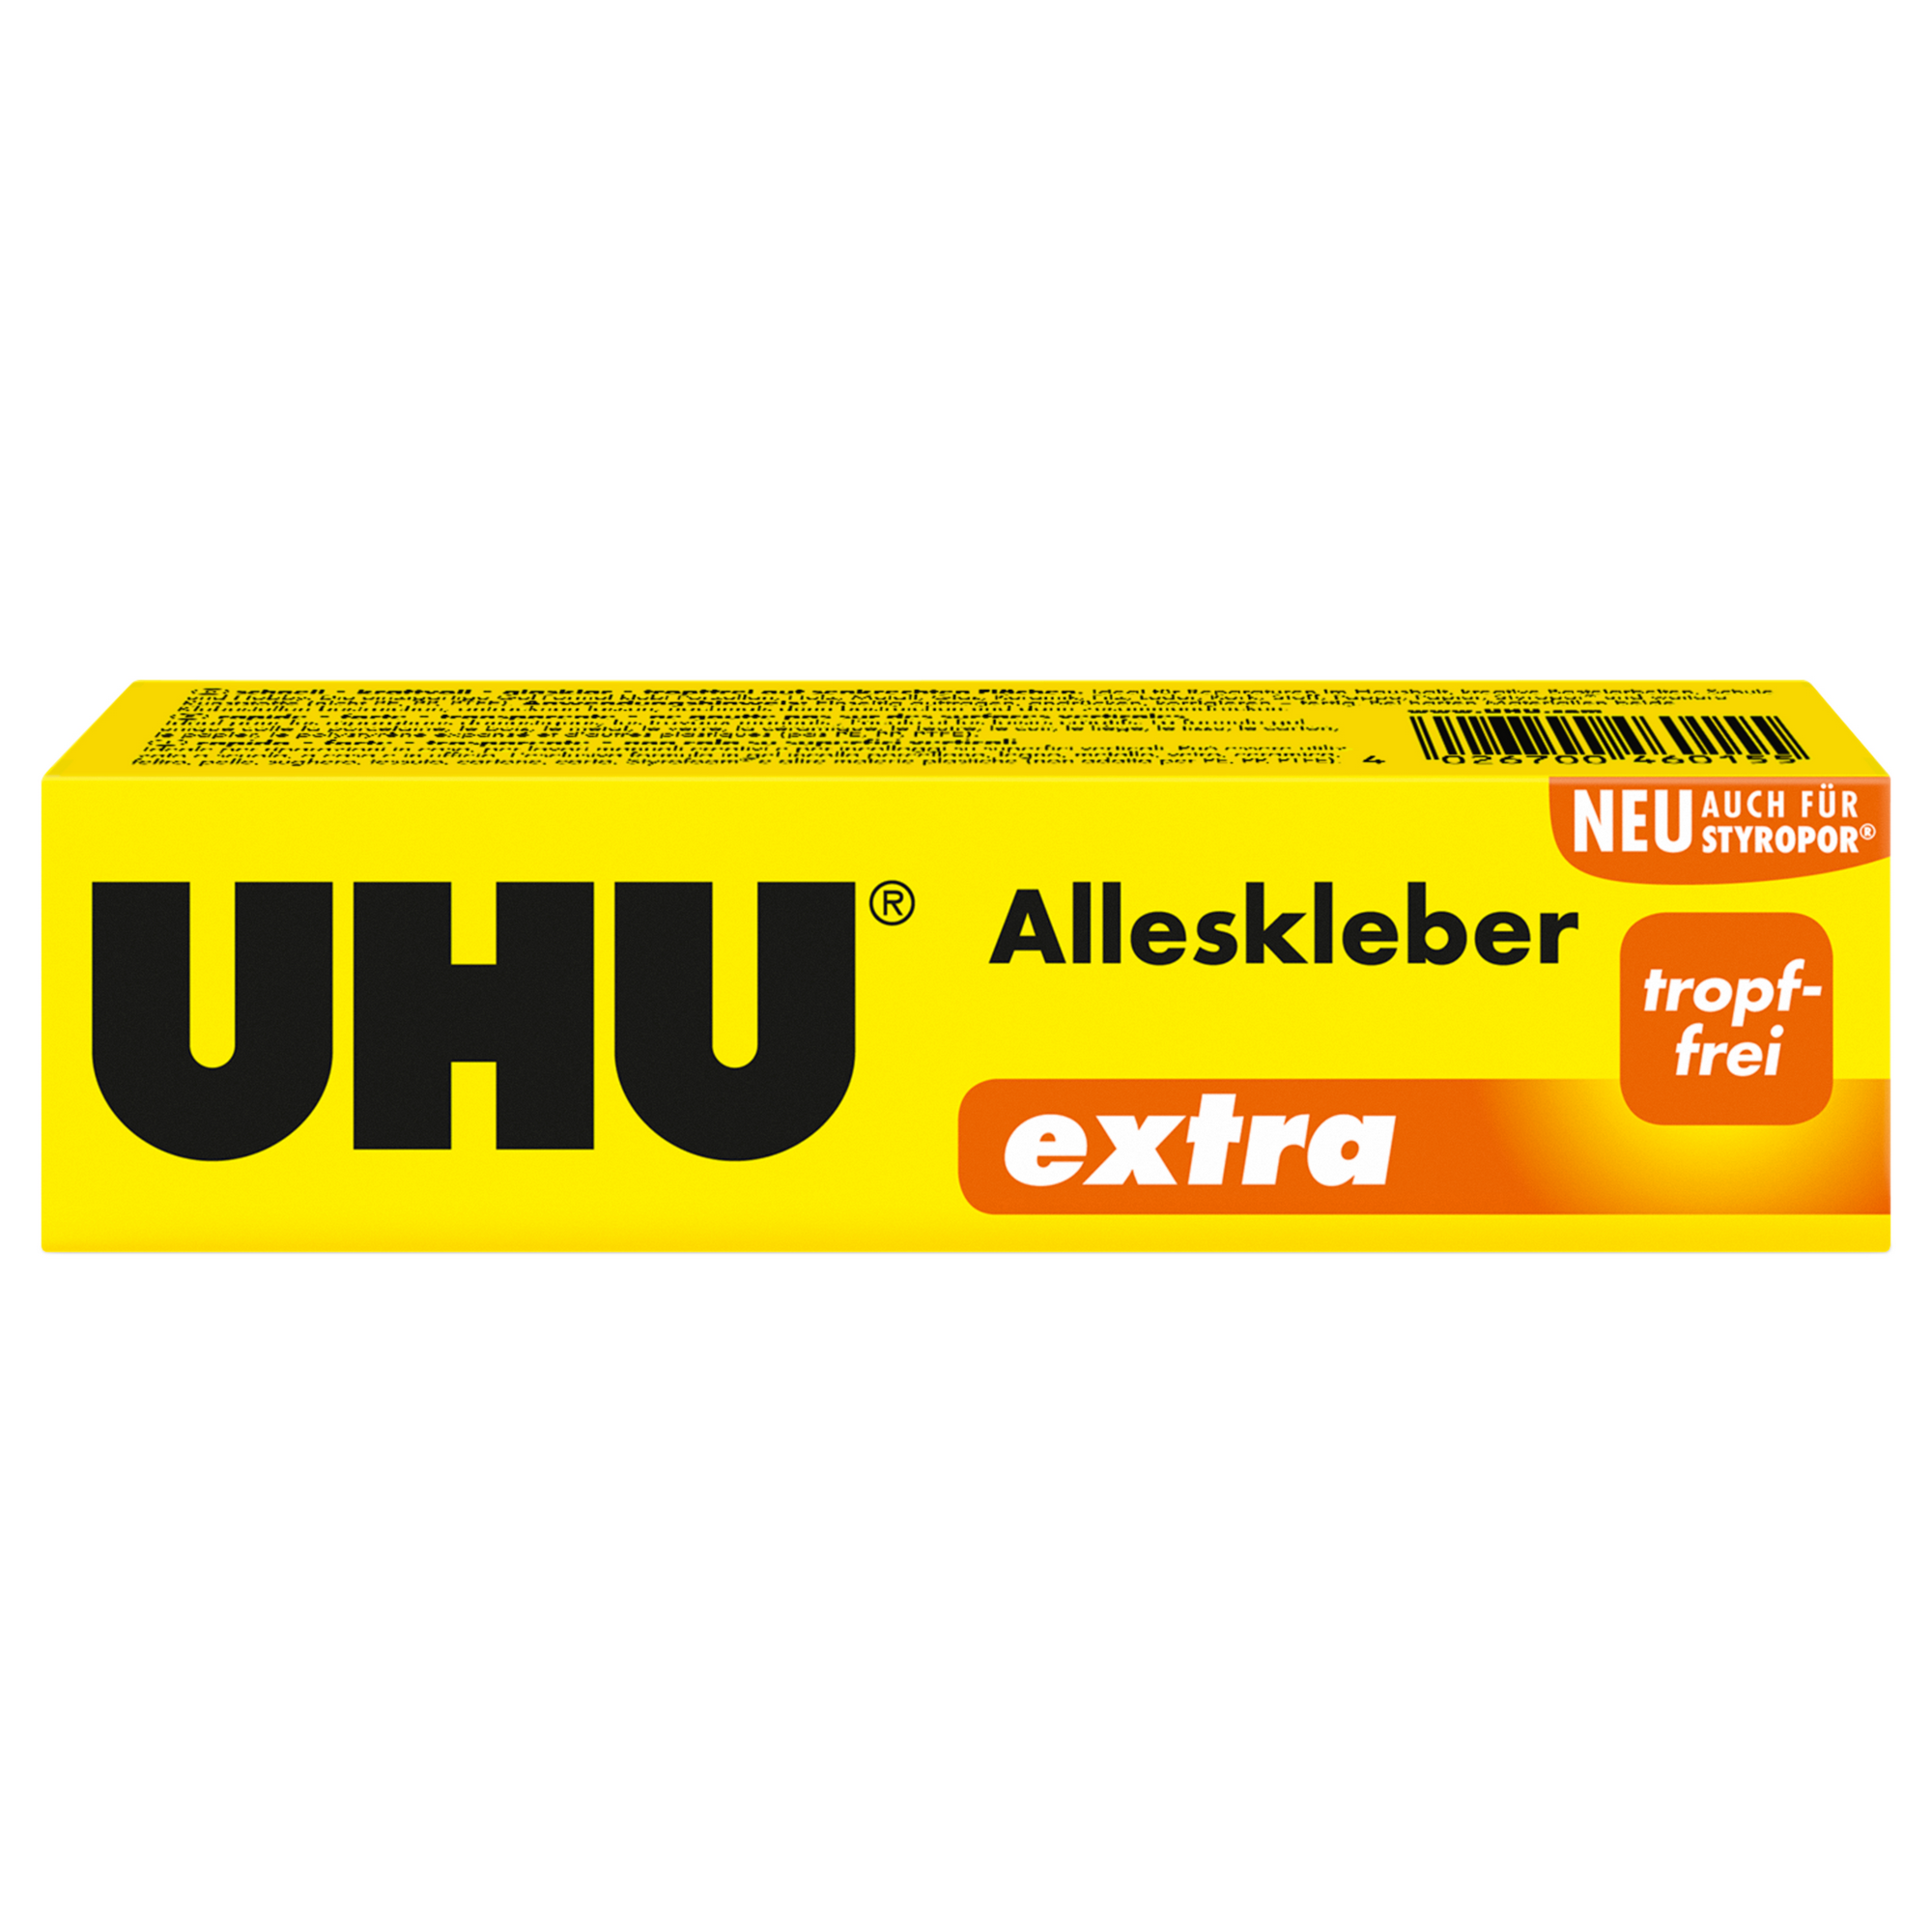 Alleskleber 'Extra' 31 g + product picture